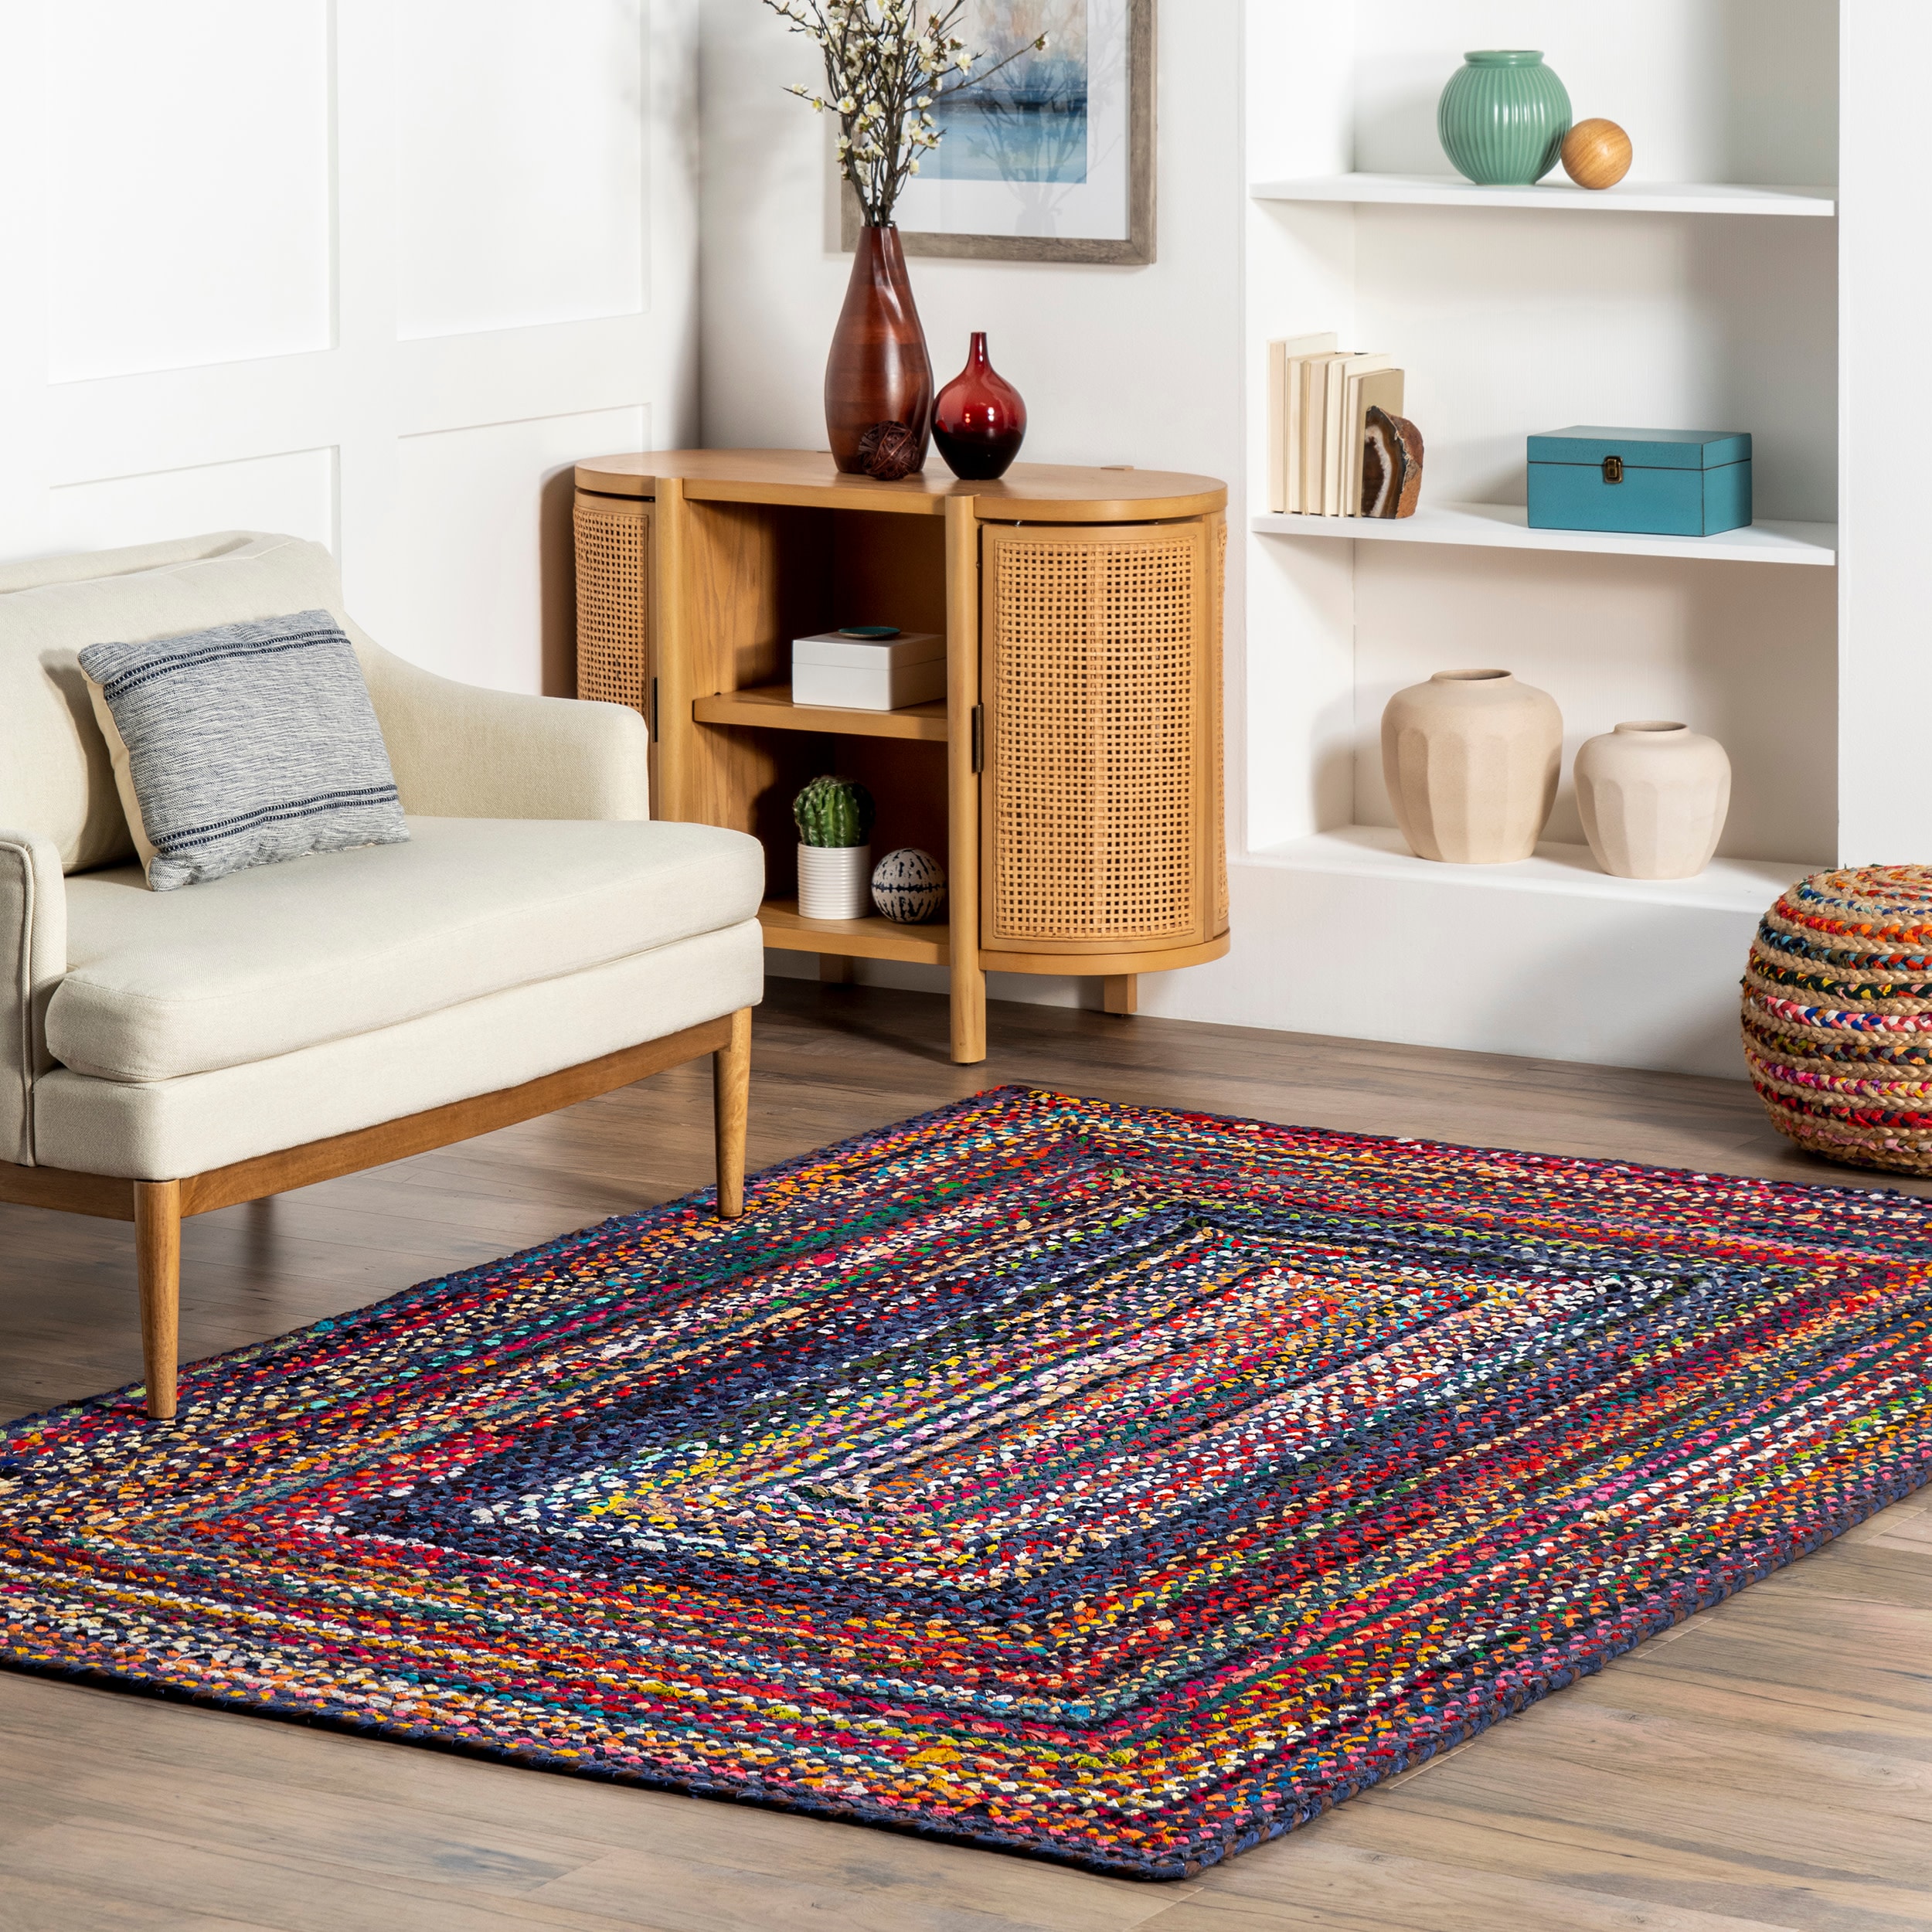 Braided RAG RUG 2 X 14 Ft Chindi Area RUG for Living Room Indoor Rugs